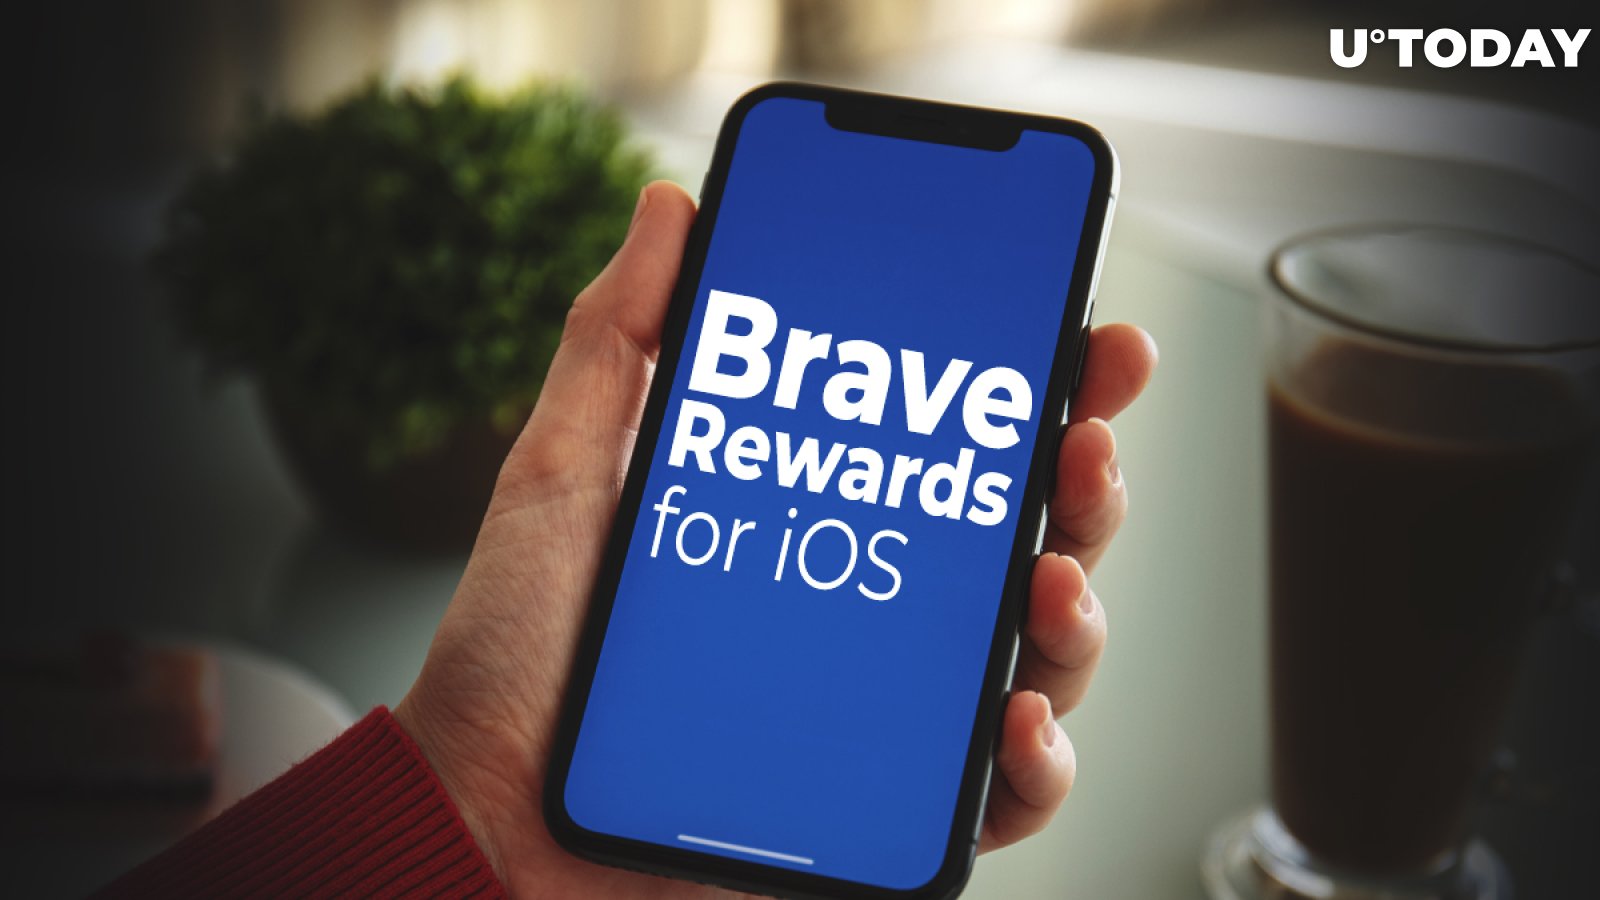 Brave Rewards Might Soon Be Available for iOS Users 